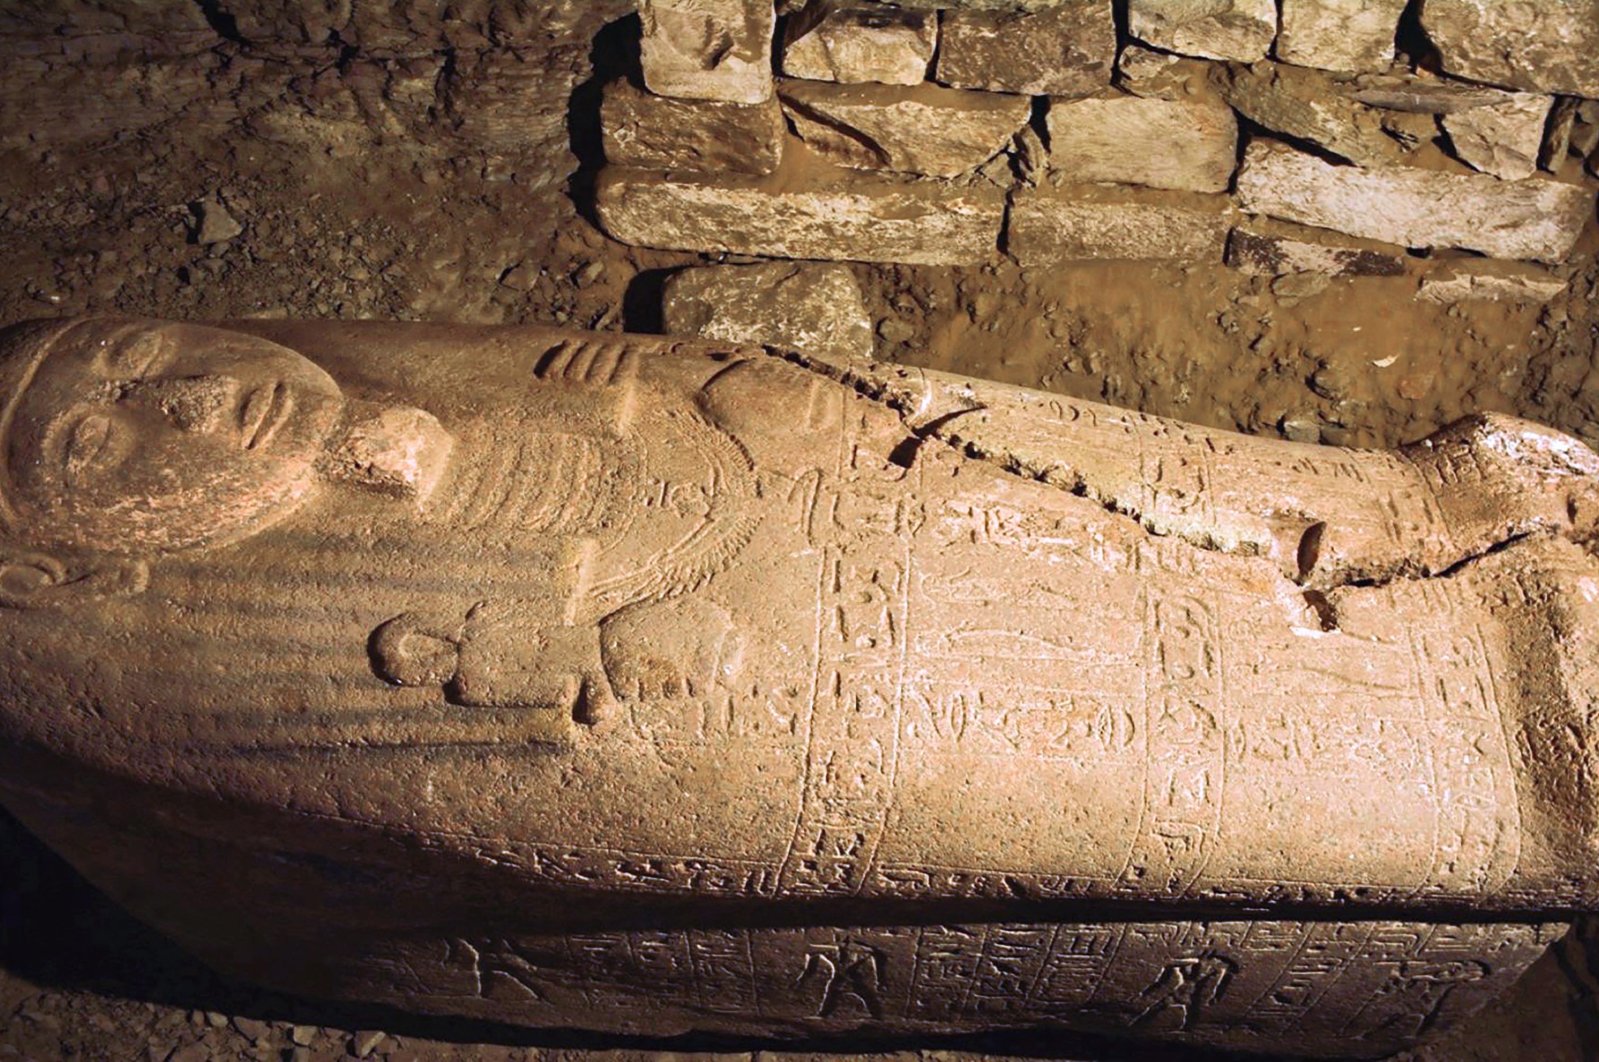 A pink granite sarcophagus belonging to a ranking government official during the reign of the ancient Egyptian New Kingdom Pharaoh Ramses II (1279–1213 B.C.), found by an Egyptian expedition at the tomb of Ptah-em-uya in Saqqara near the site of the Pyramid of Unas, is seen in this handout picture released by the Egyptian Ministry of Antiquities on Sept. 19, 2022. (Egyptian Ministry of Antiquities via AFP)